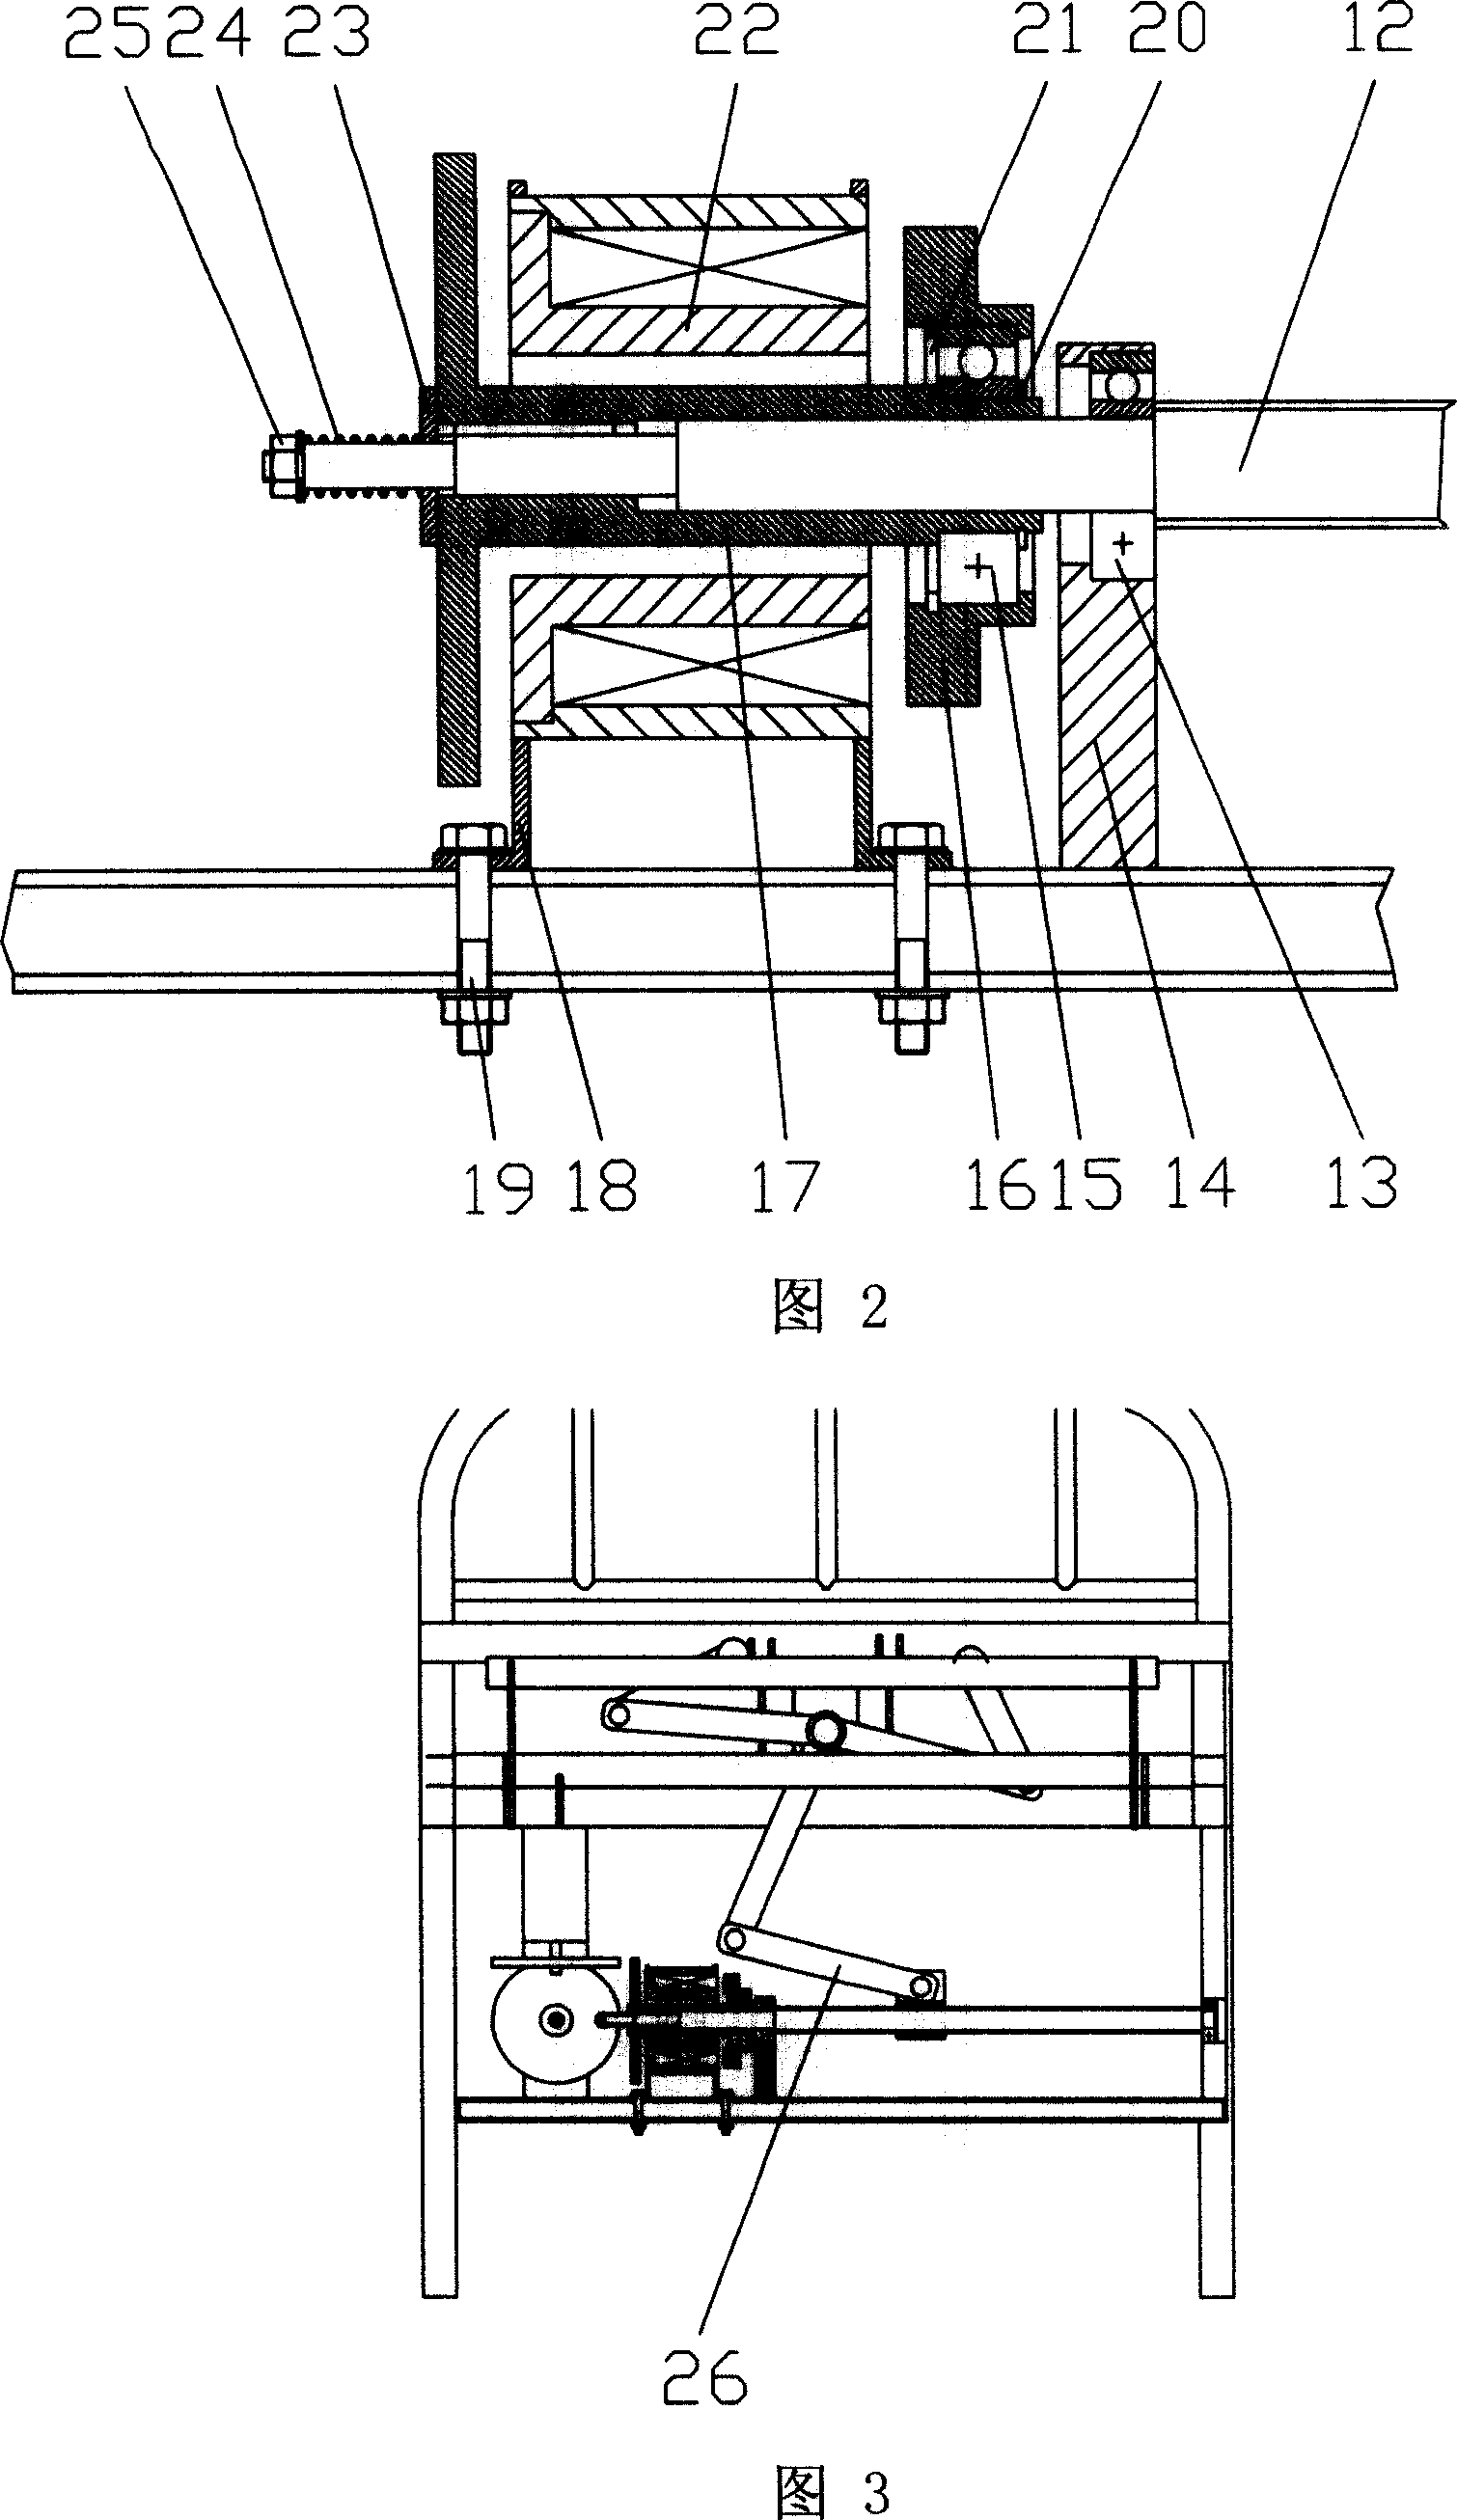 Automatic tuning bed